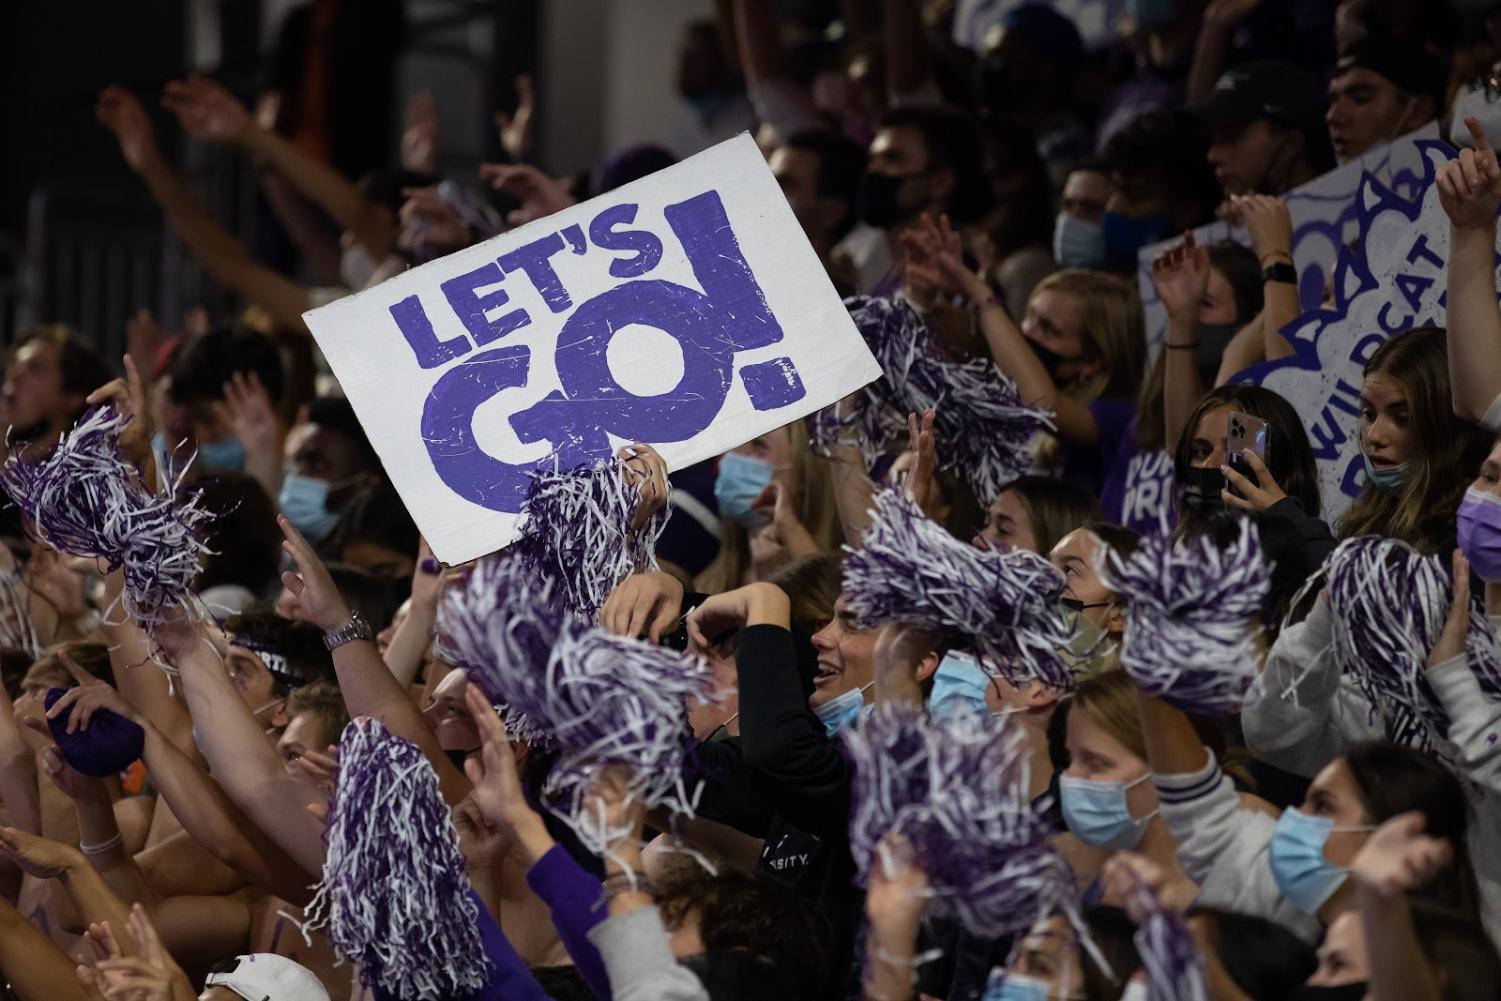 Large+group+of+students+with+arms+in+the+air+holding+purple-and-white+poms+cheer+on+the+team.+One+student+is+holding+a+white+sign+with+large+purple+letters+saying+%E2%80%9CLet%E2%80%99s+go%21%E2%80%9D